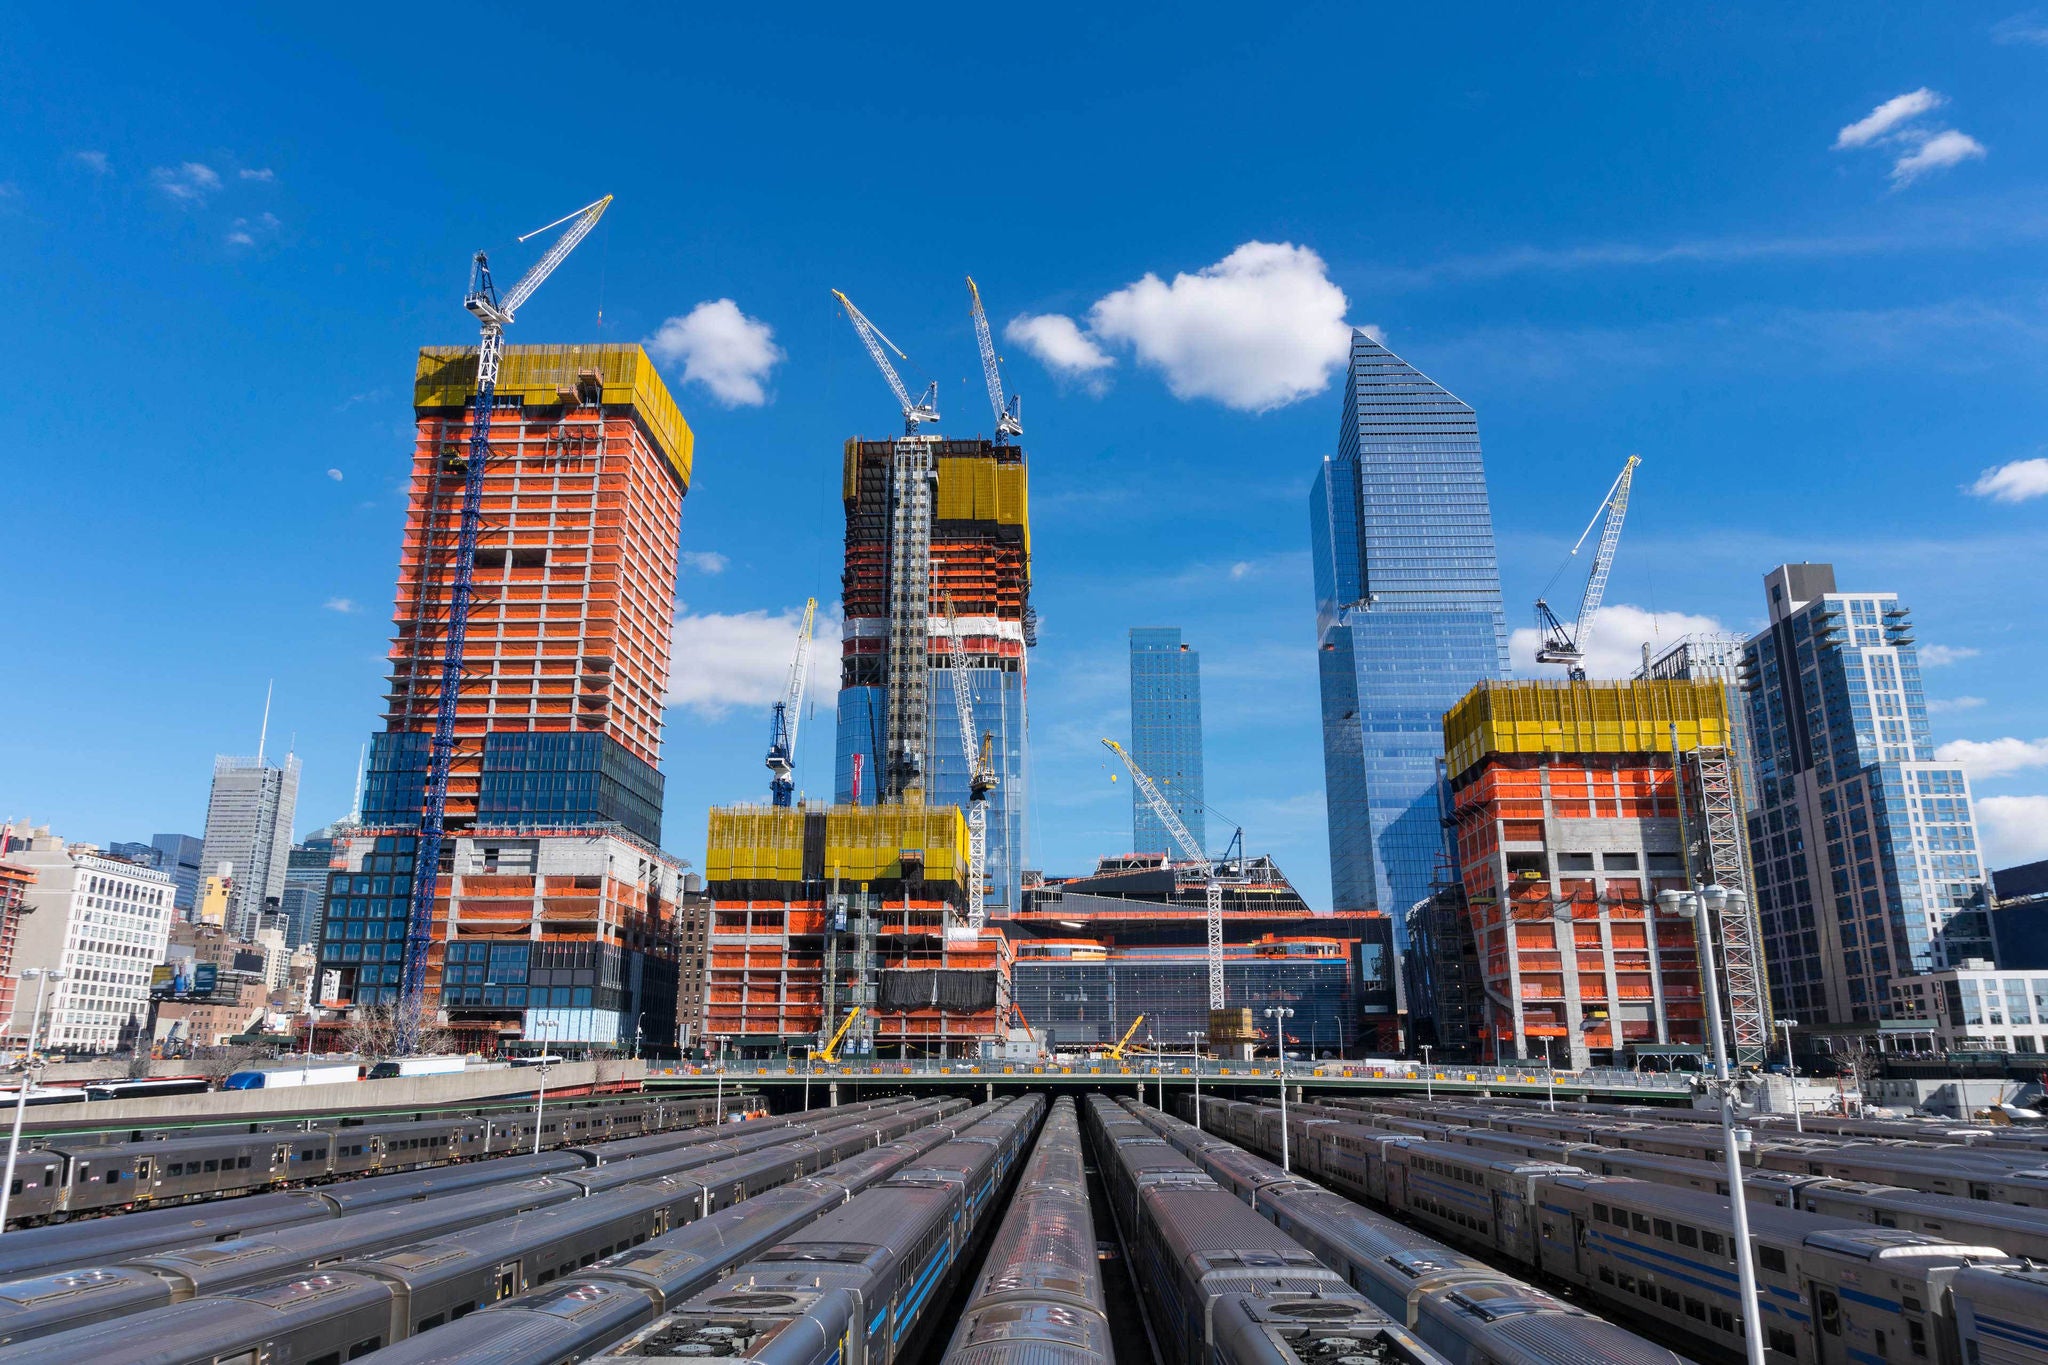 EY Hudson Yards Redevelopment Project